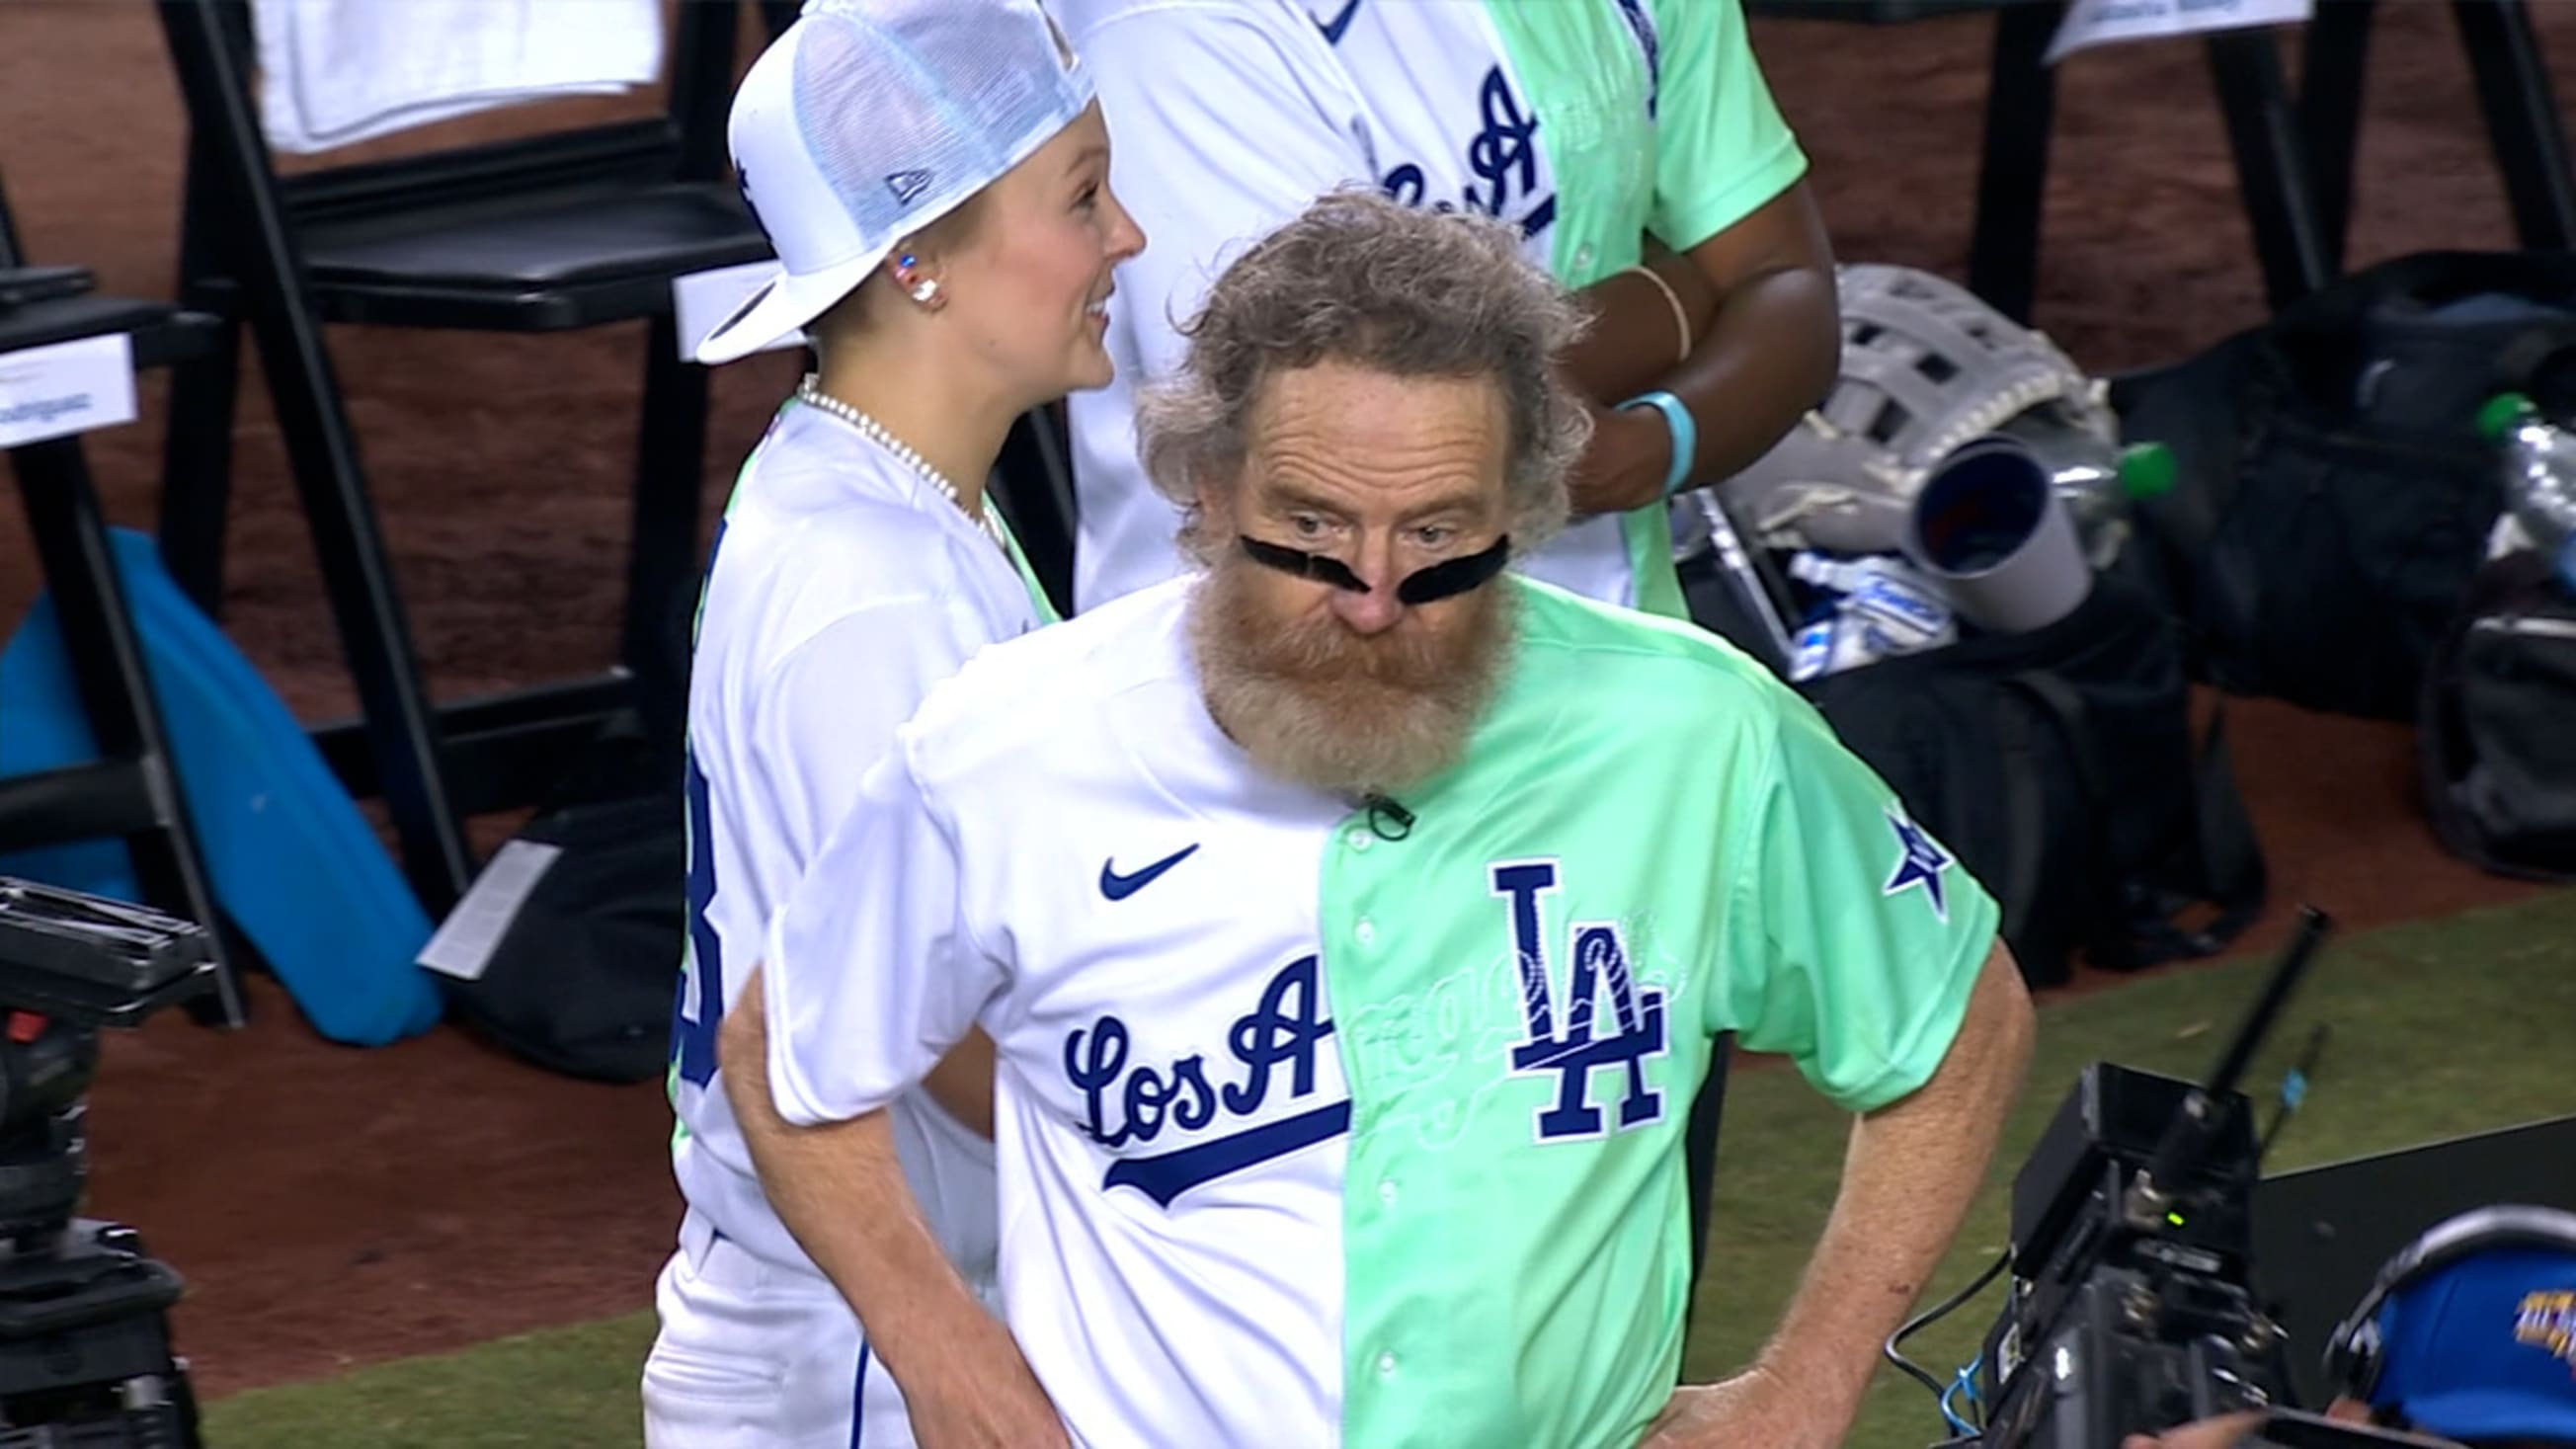 Bryan Cranston gets ejected, 07/17/2022